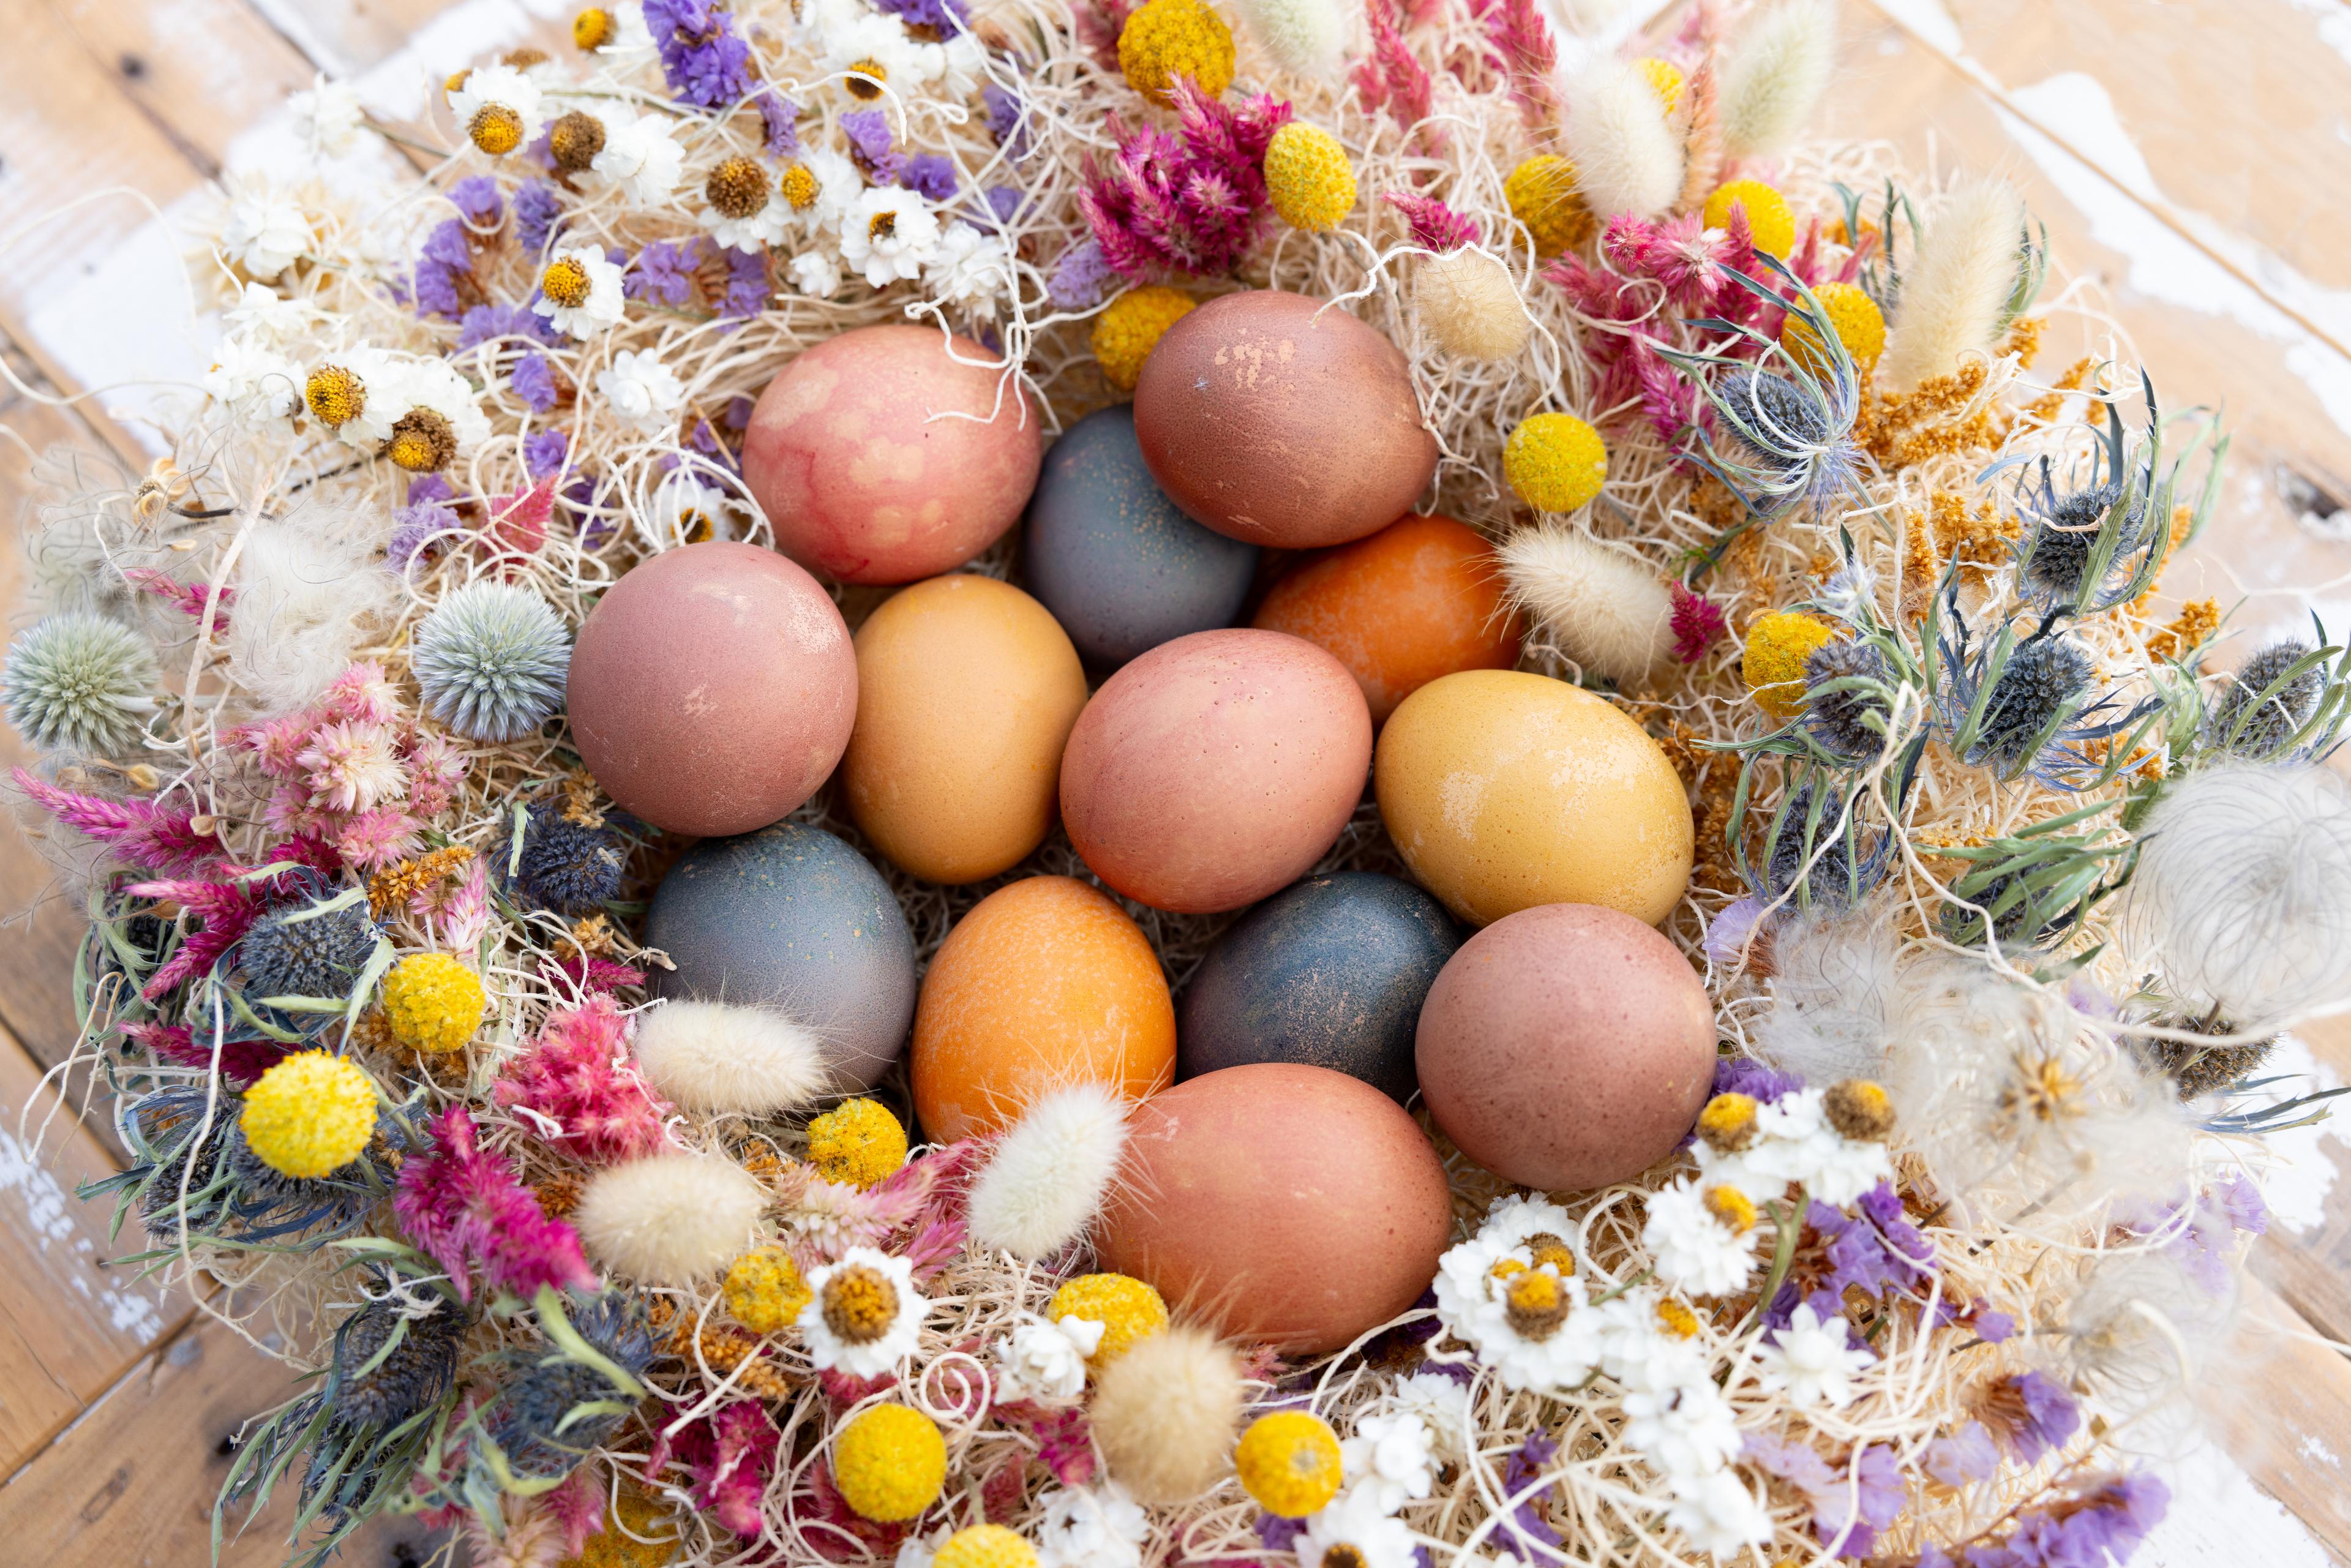 Dyed eggs centered in an arrangement of dried wildflowers.